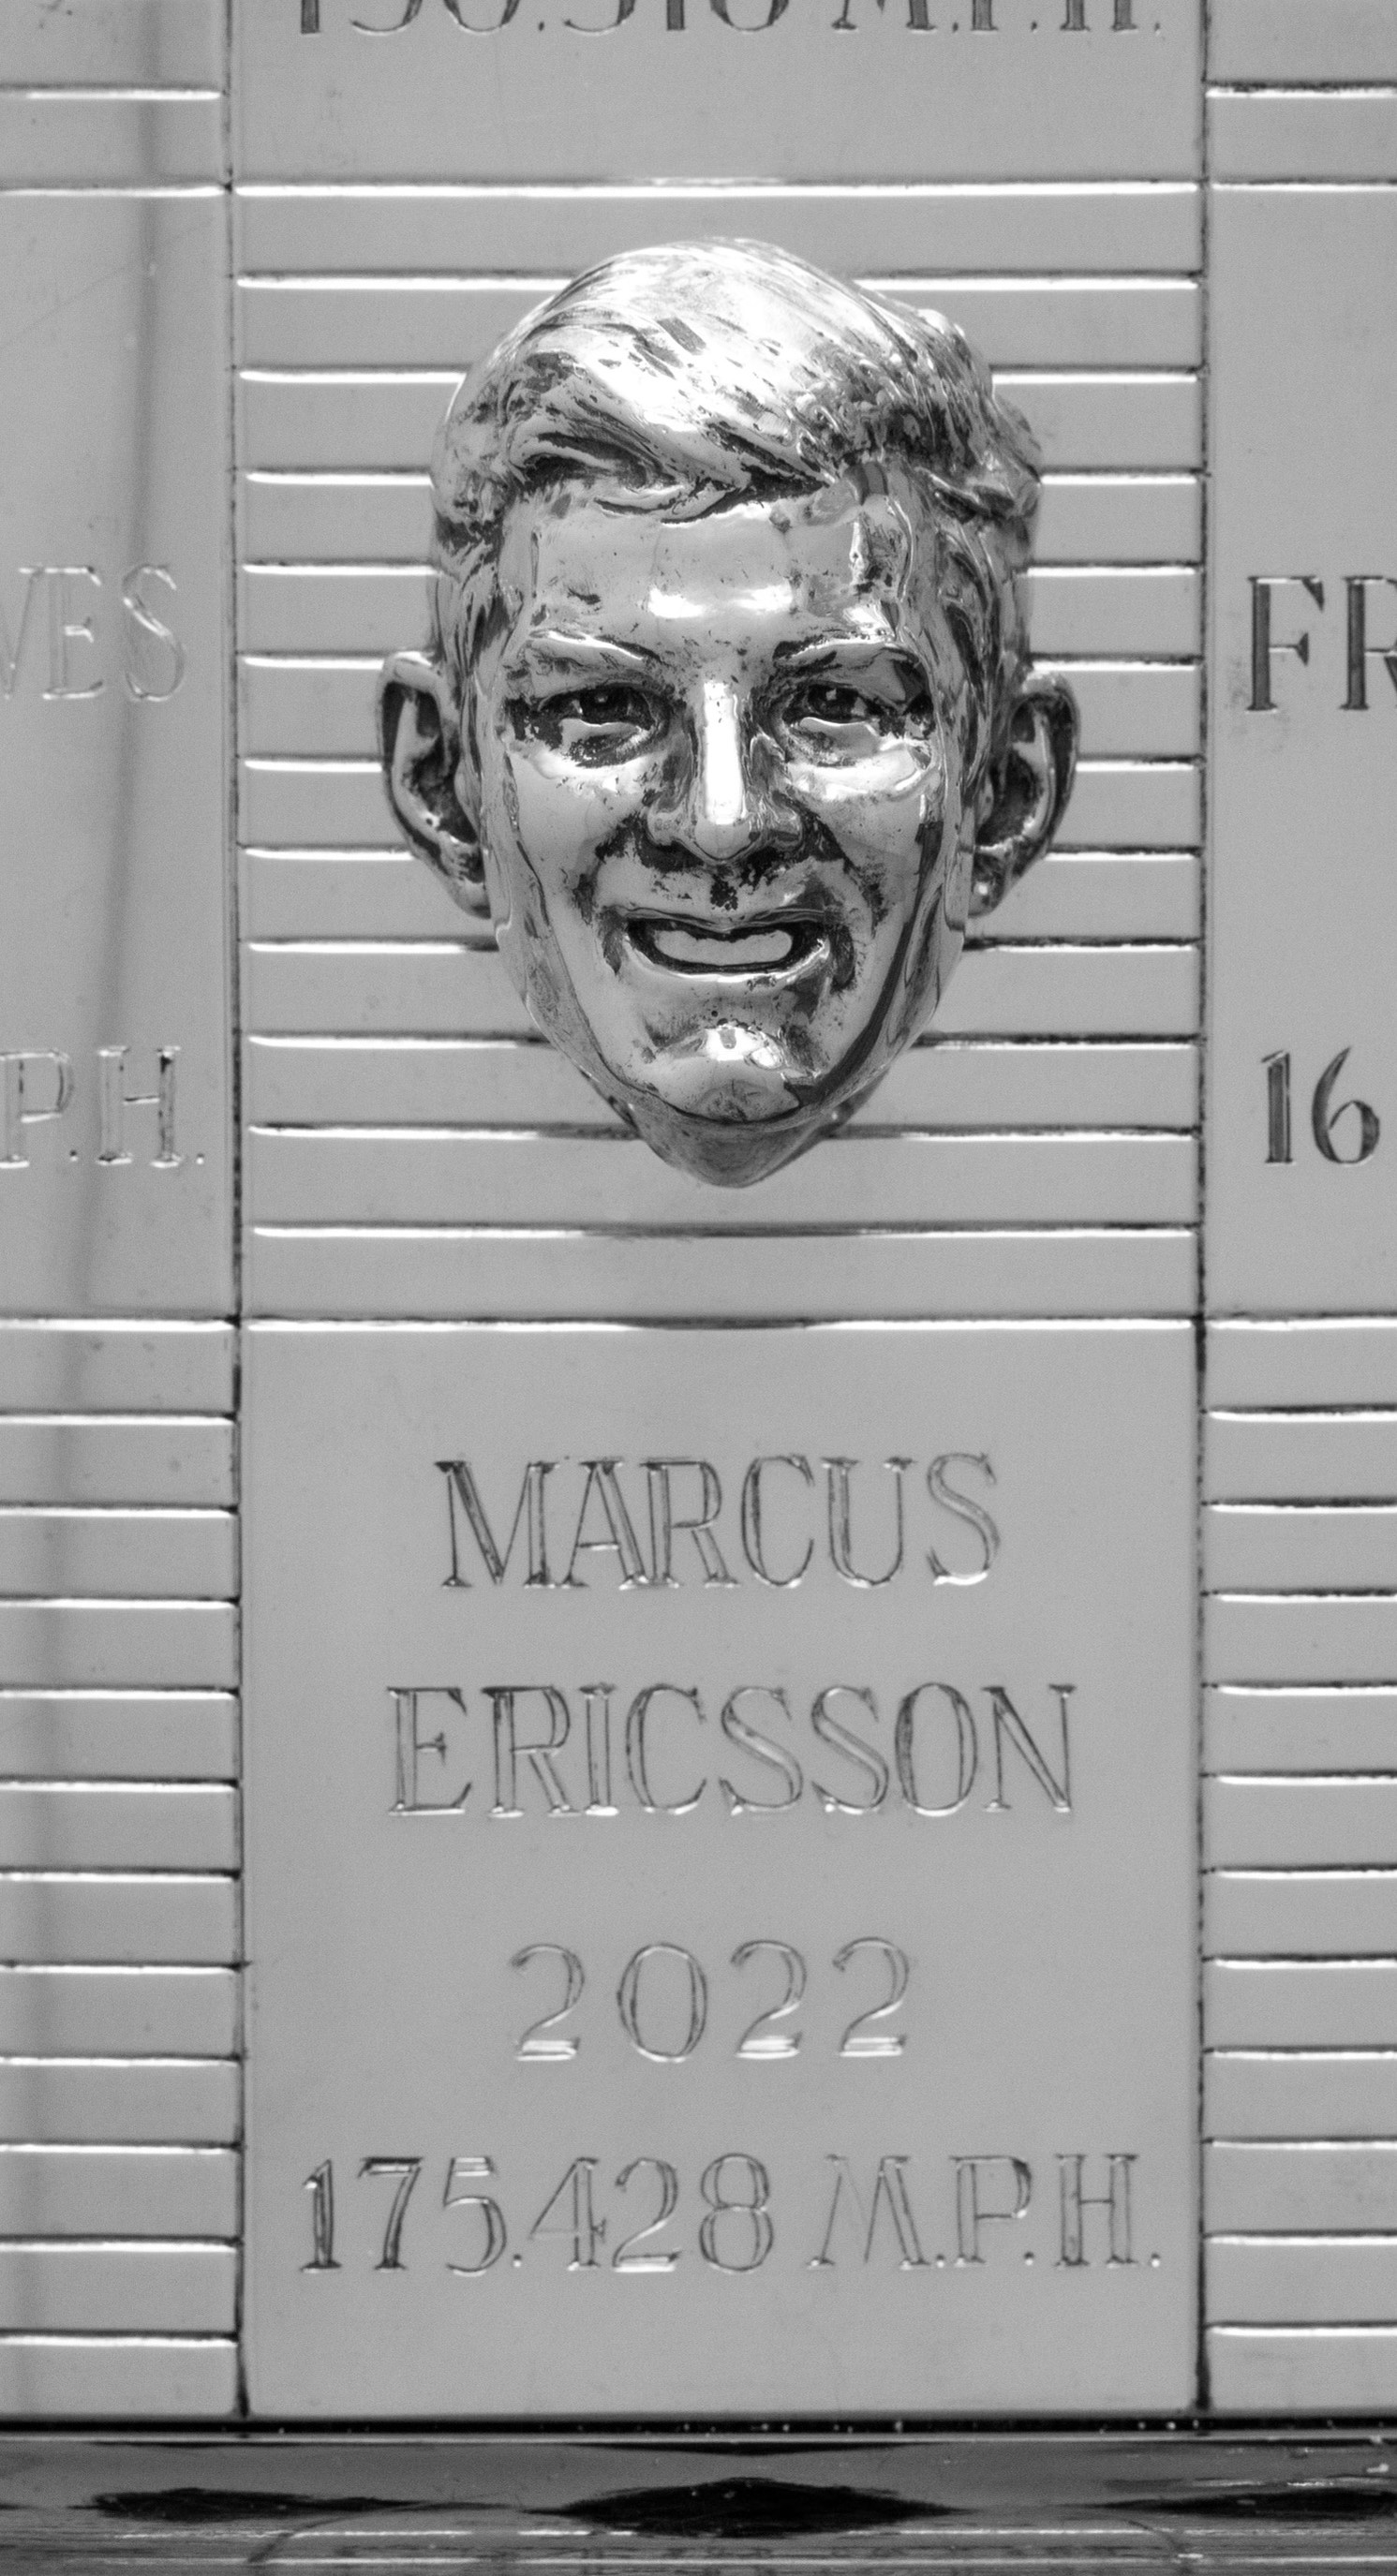 Sculpted head of smiling man above engraving on trophy